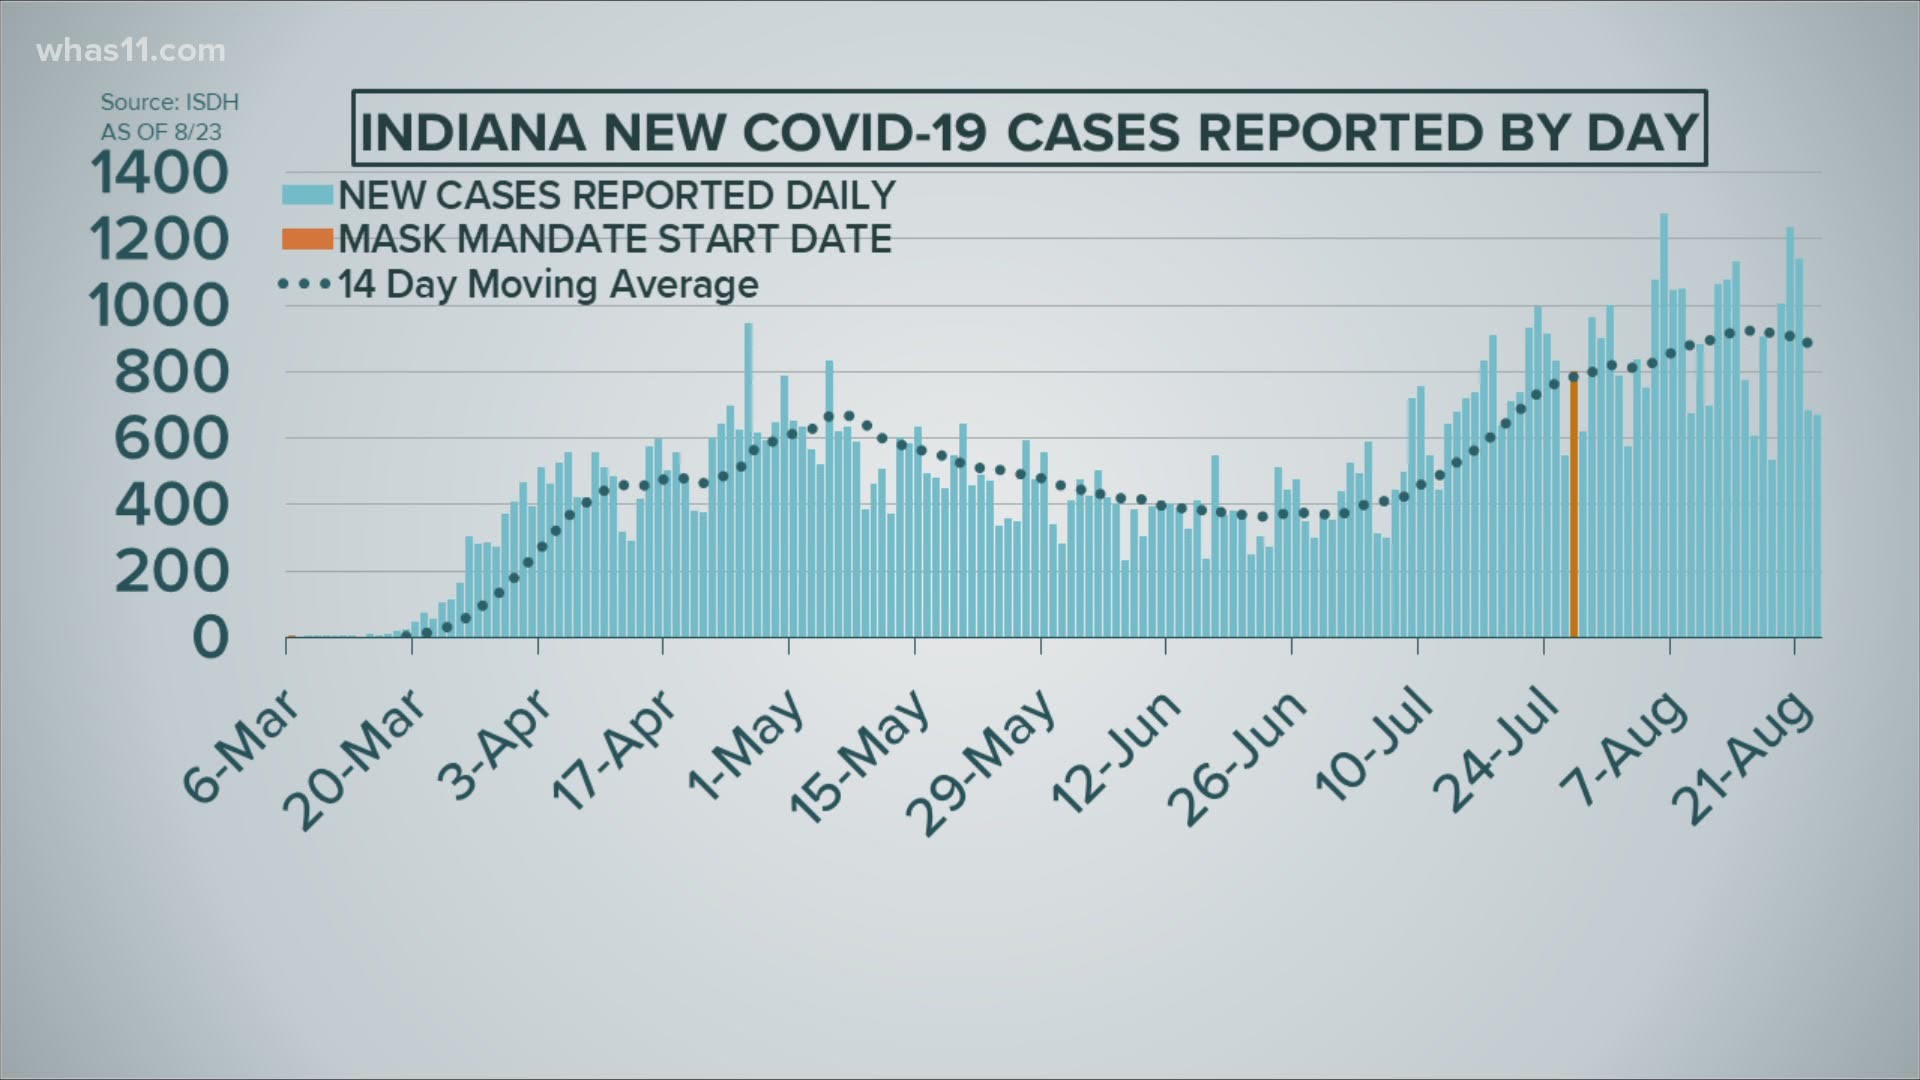 COVID-19 cases in Kentucky appear to have leveled at high rate, while Indiana cases show signs of decline